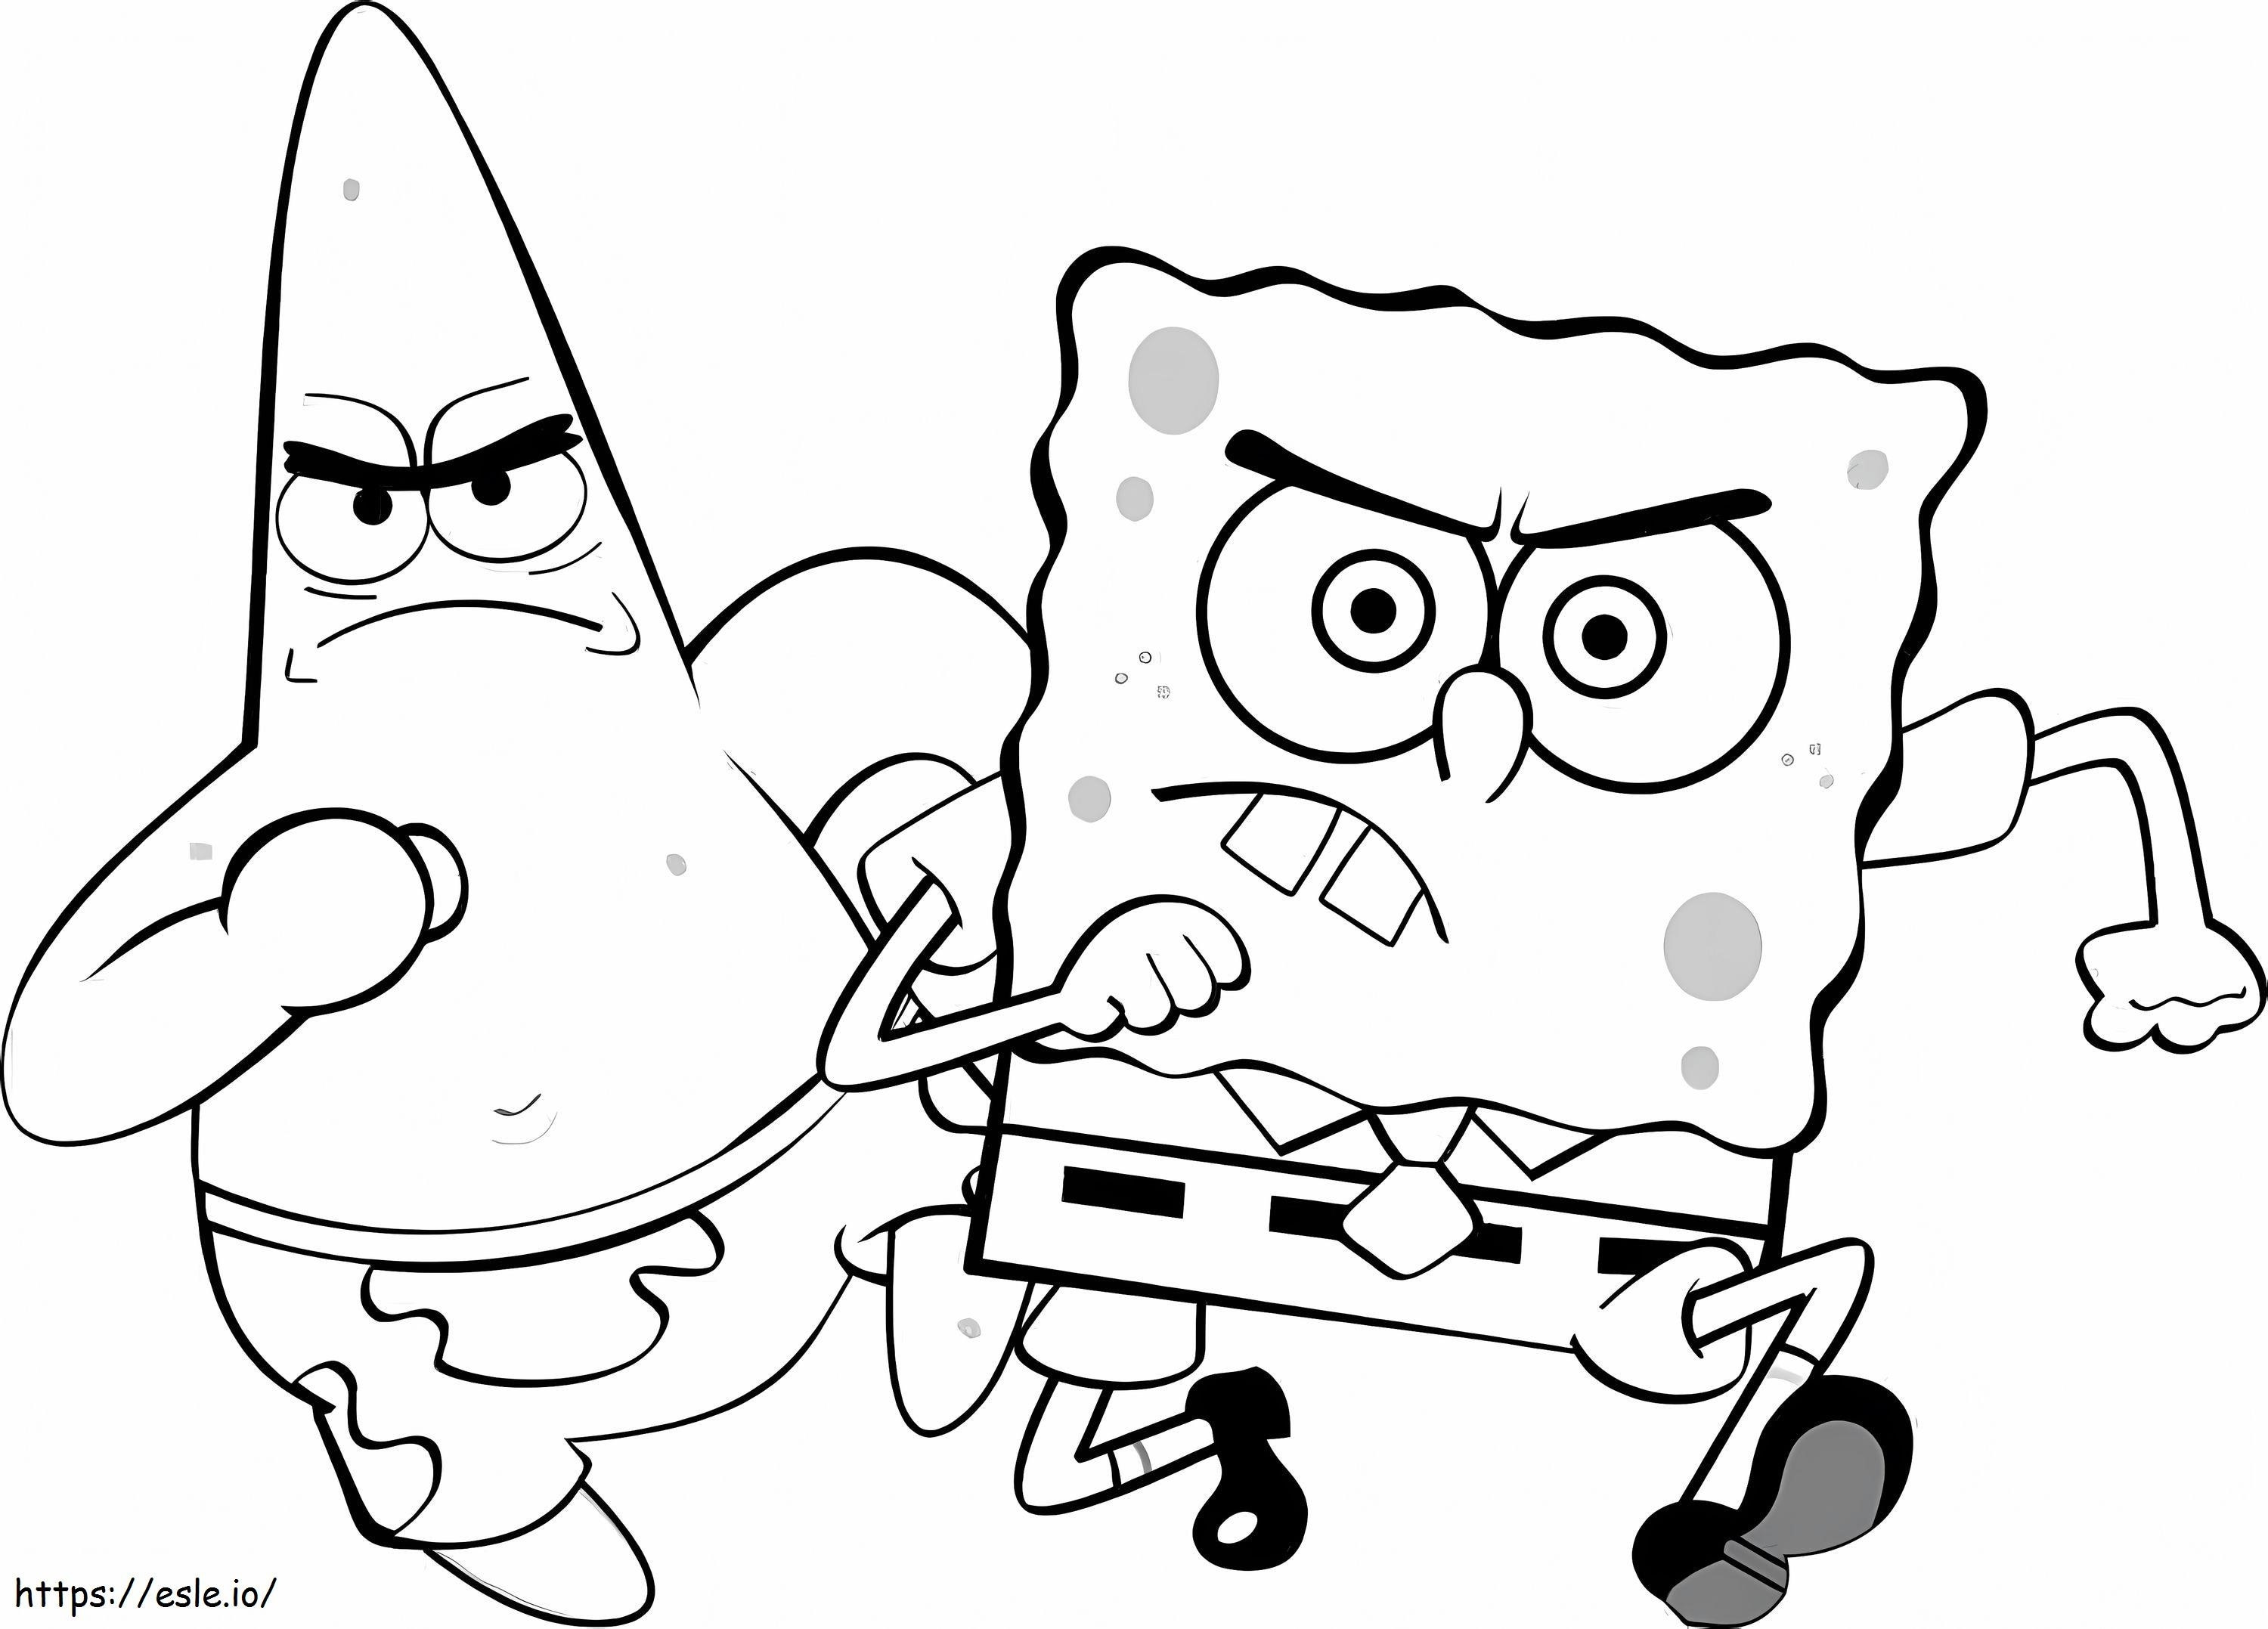 Patrick Star And Spongebob Running coloring page